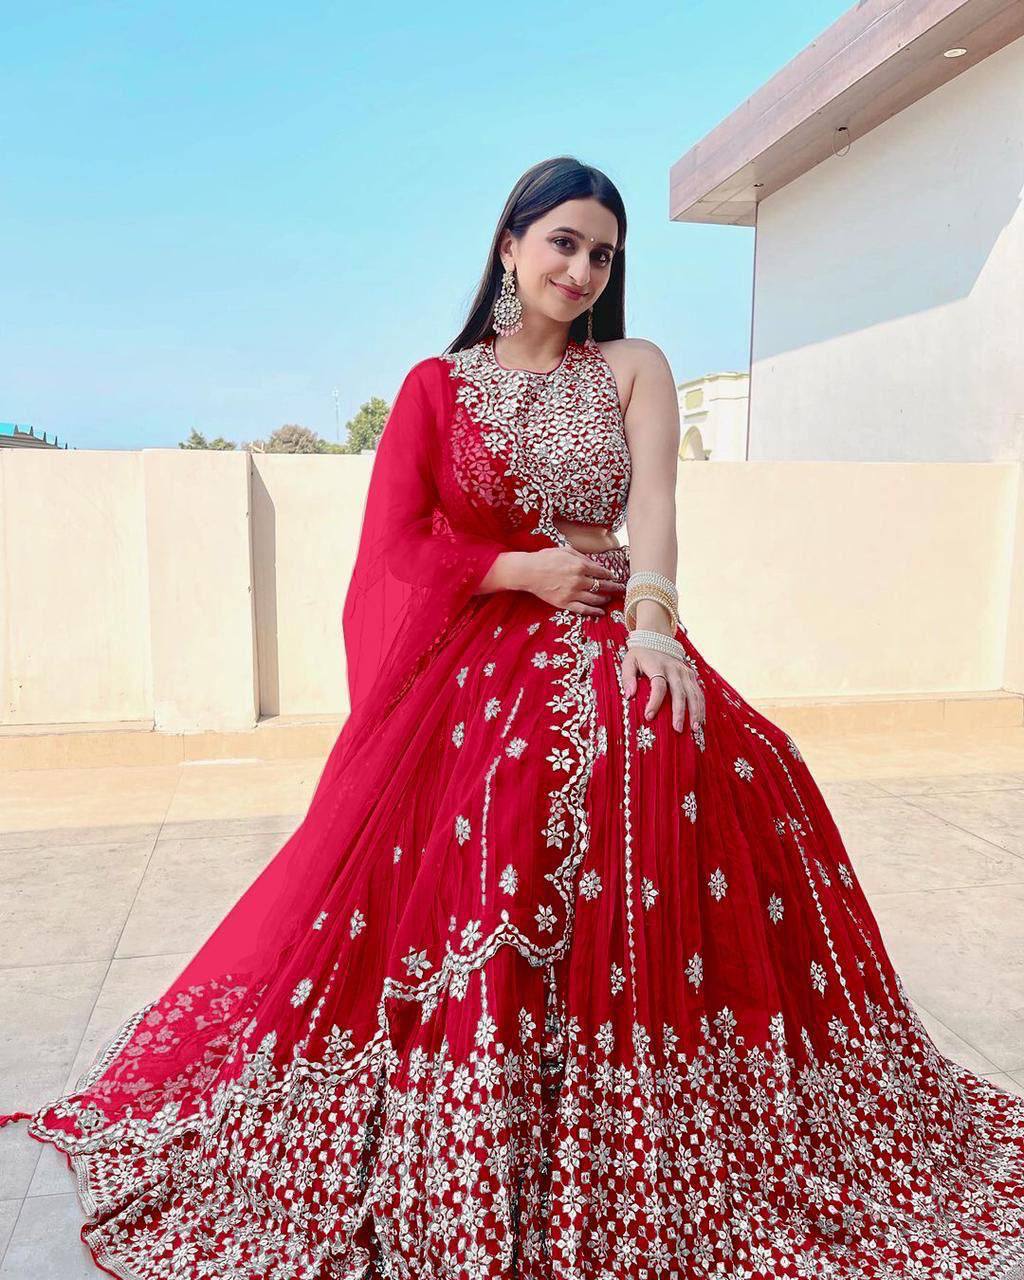 How gorgeous is our pretty Designer Red Lehenga😍❤️ . Checkout our bridal  collection in our Store or on our website, Link in Bio! .... | Instagram